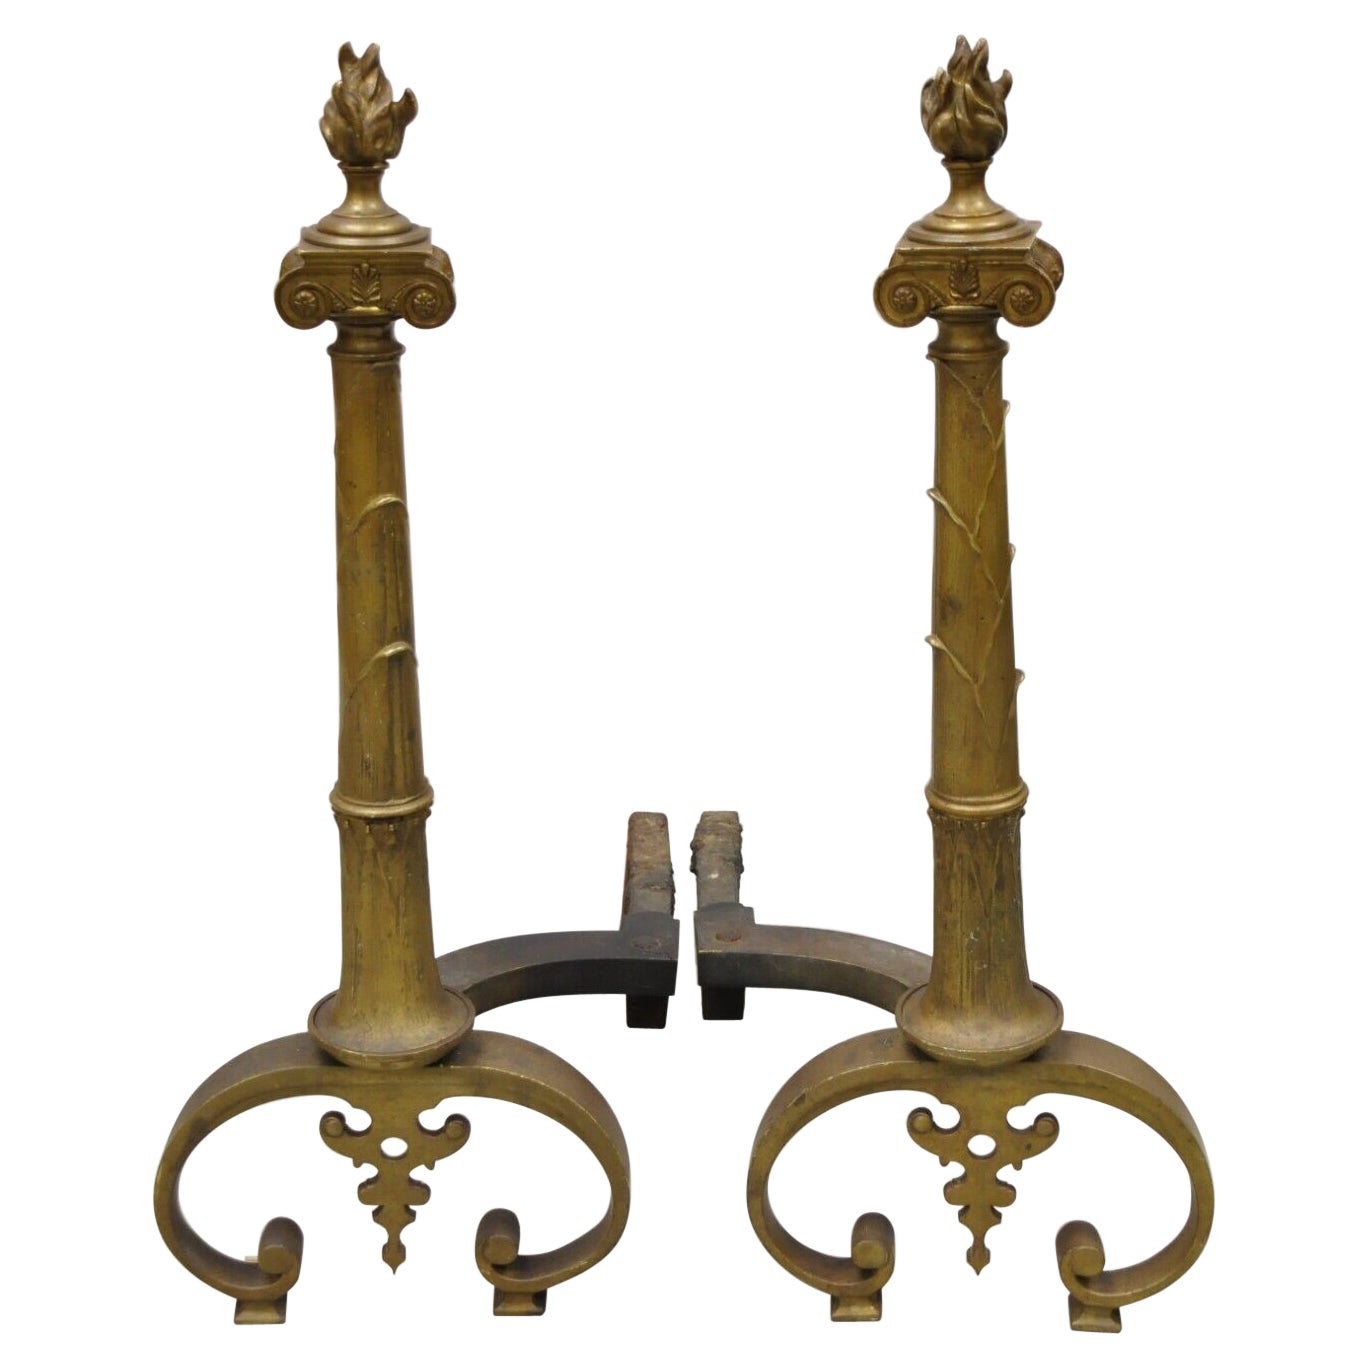 Antique French Empire Renaissance Style Torch Flame Finial Bronze Andirons Pair